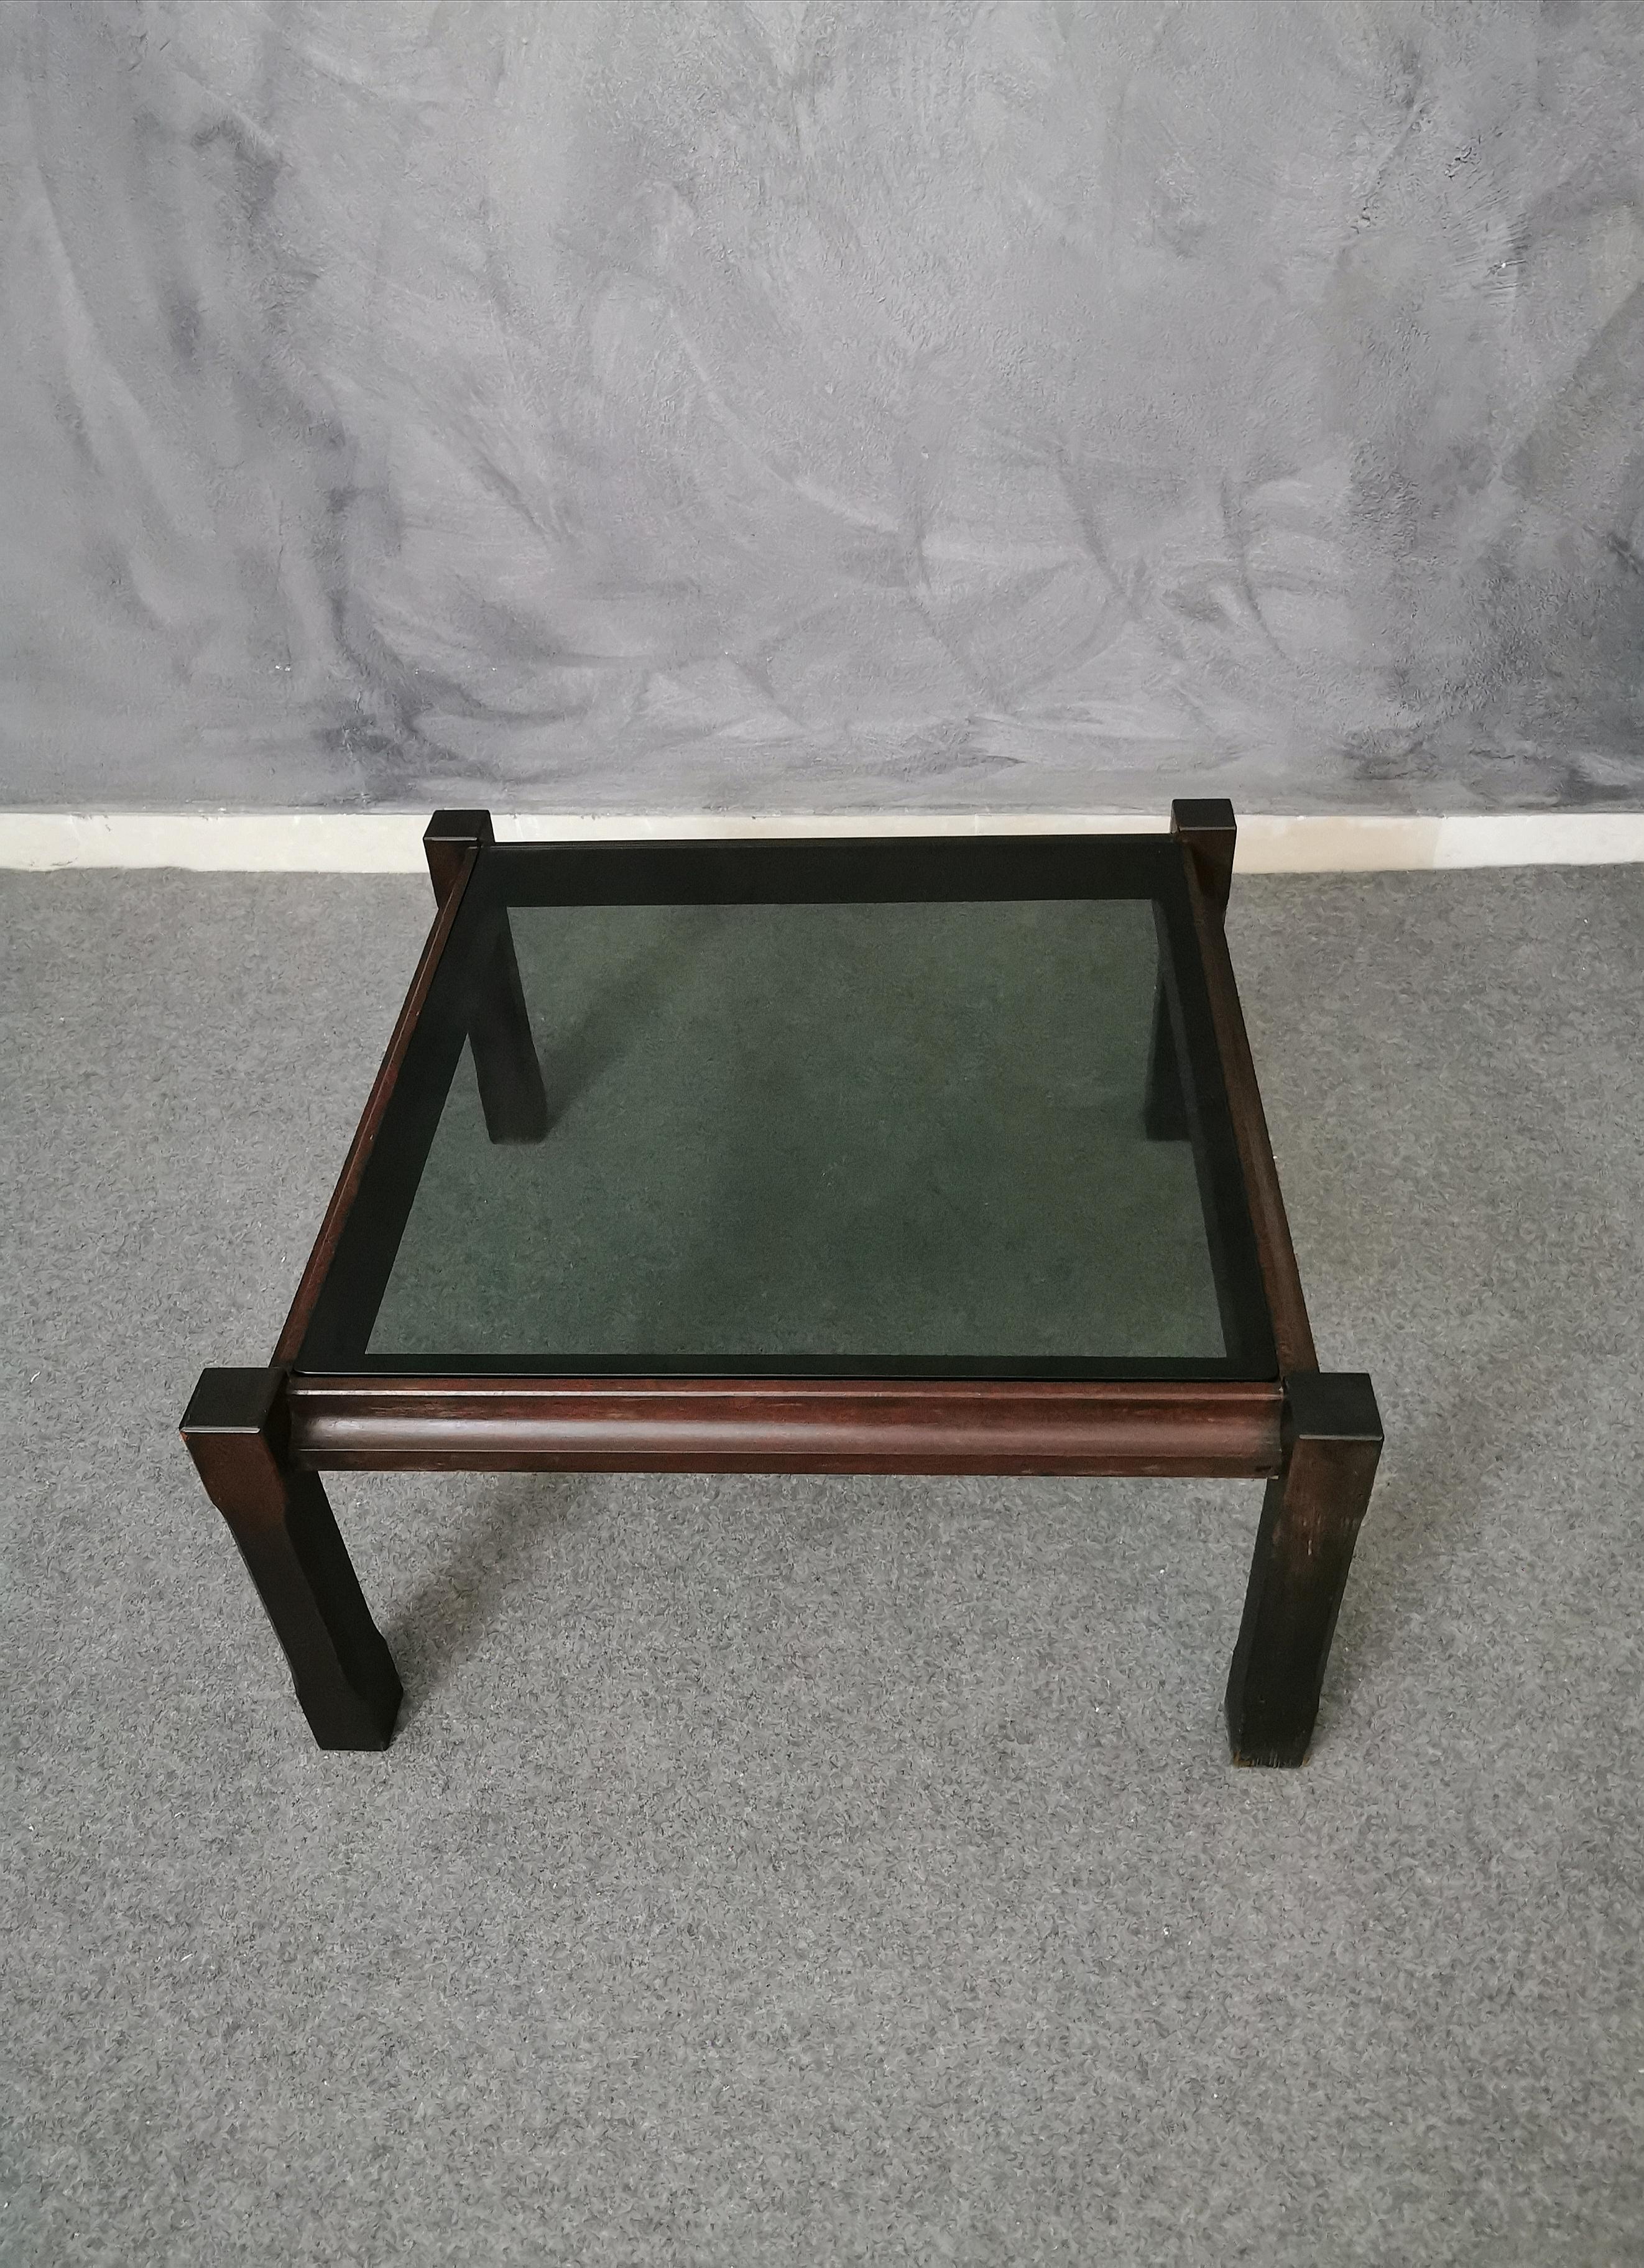 Square wood coffee table with removable smoked glass top. The coffee table has 4 wooden feet that protrude slightly in the part of the glass top, Italian production of the 1960s.